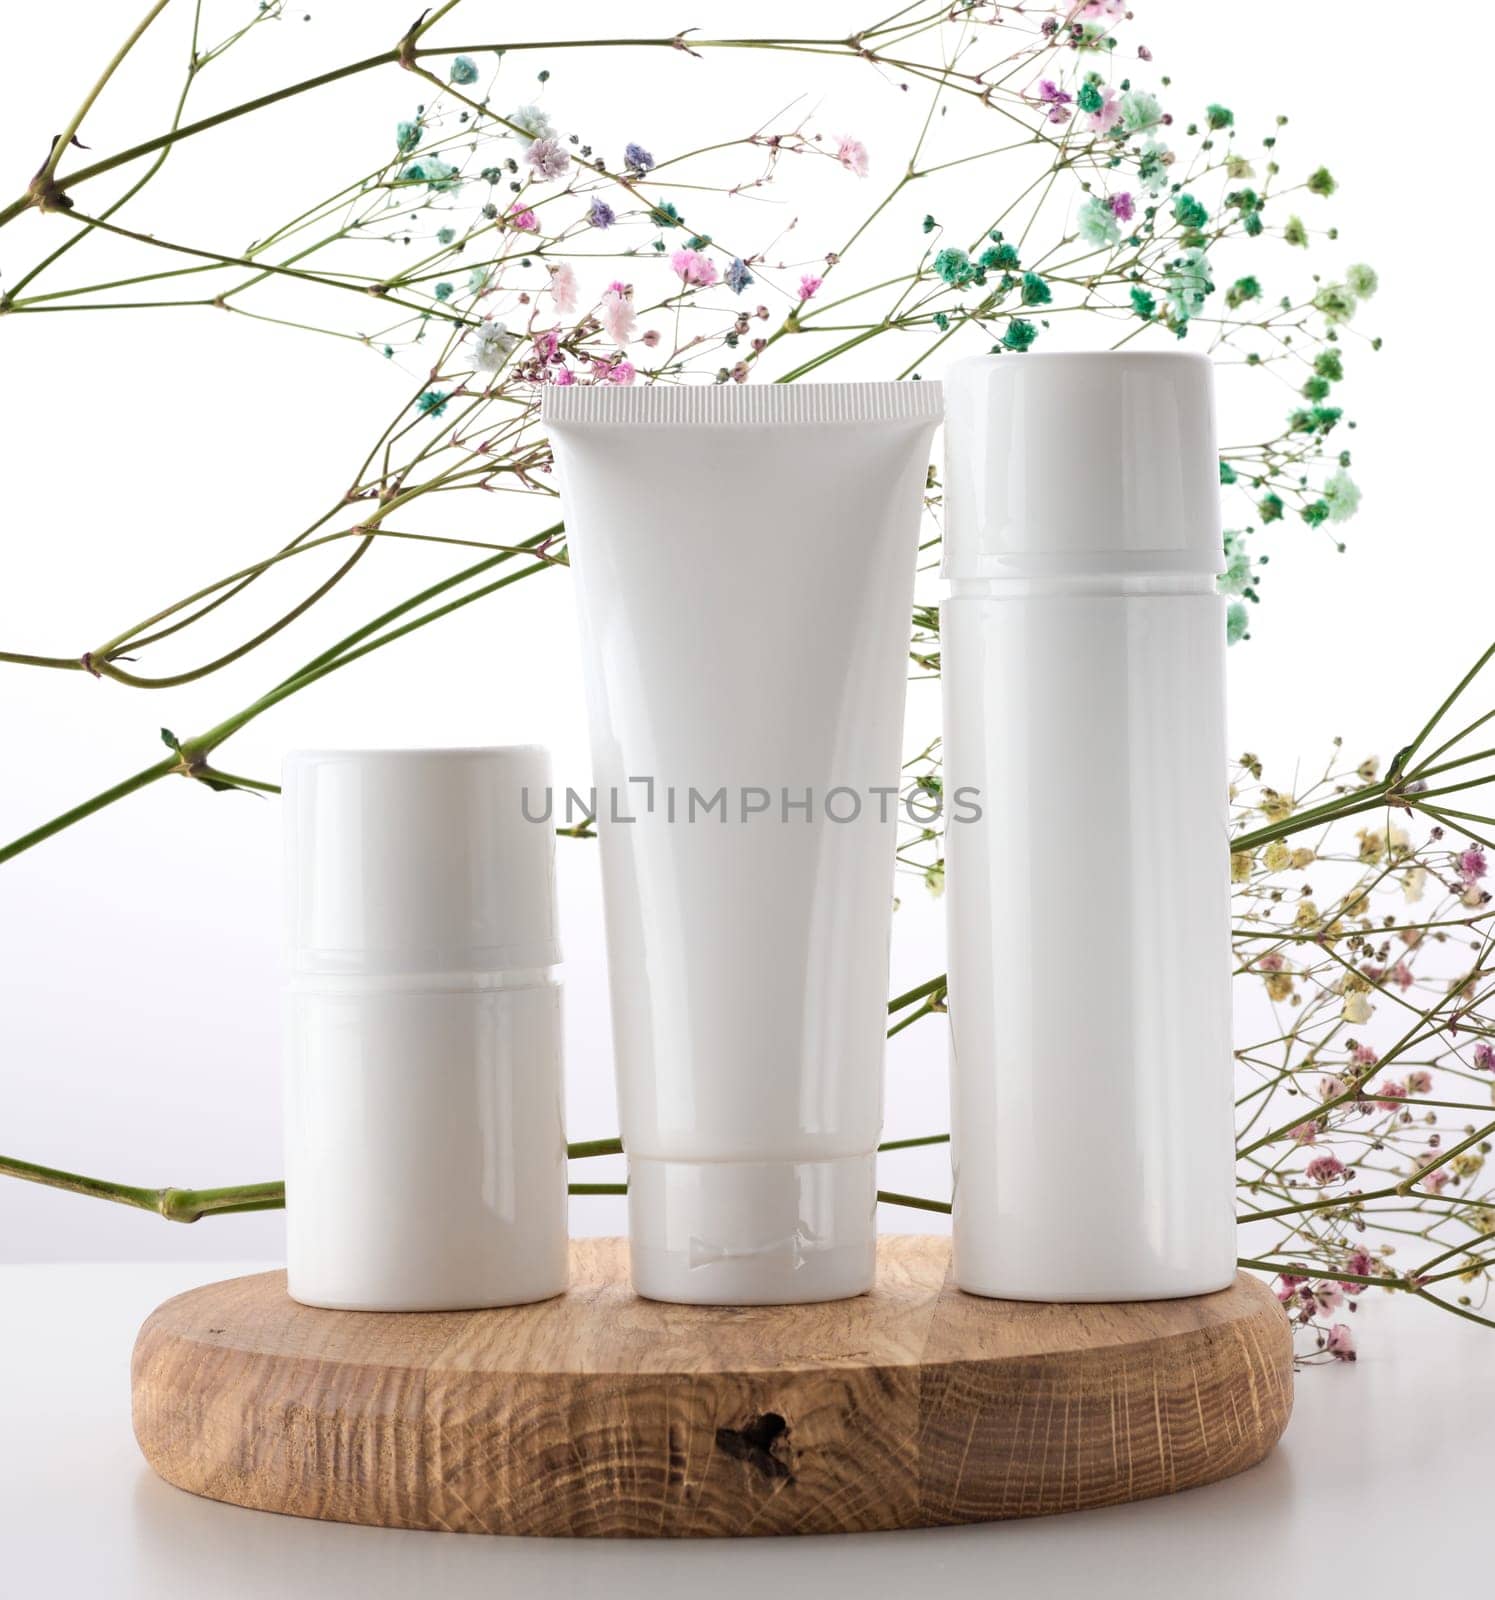 Bottle, empty white plastic tubes for cosmetics. Packaging for cream, gel, serum, advertising and product promotion, mock up